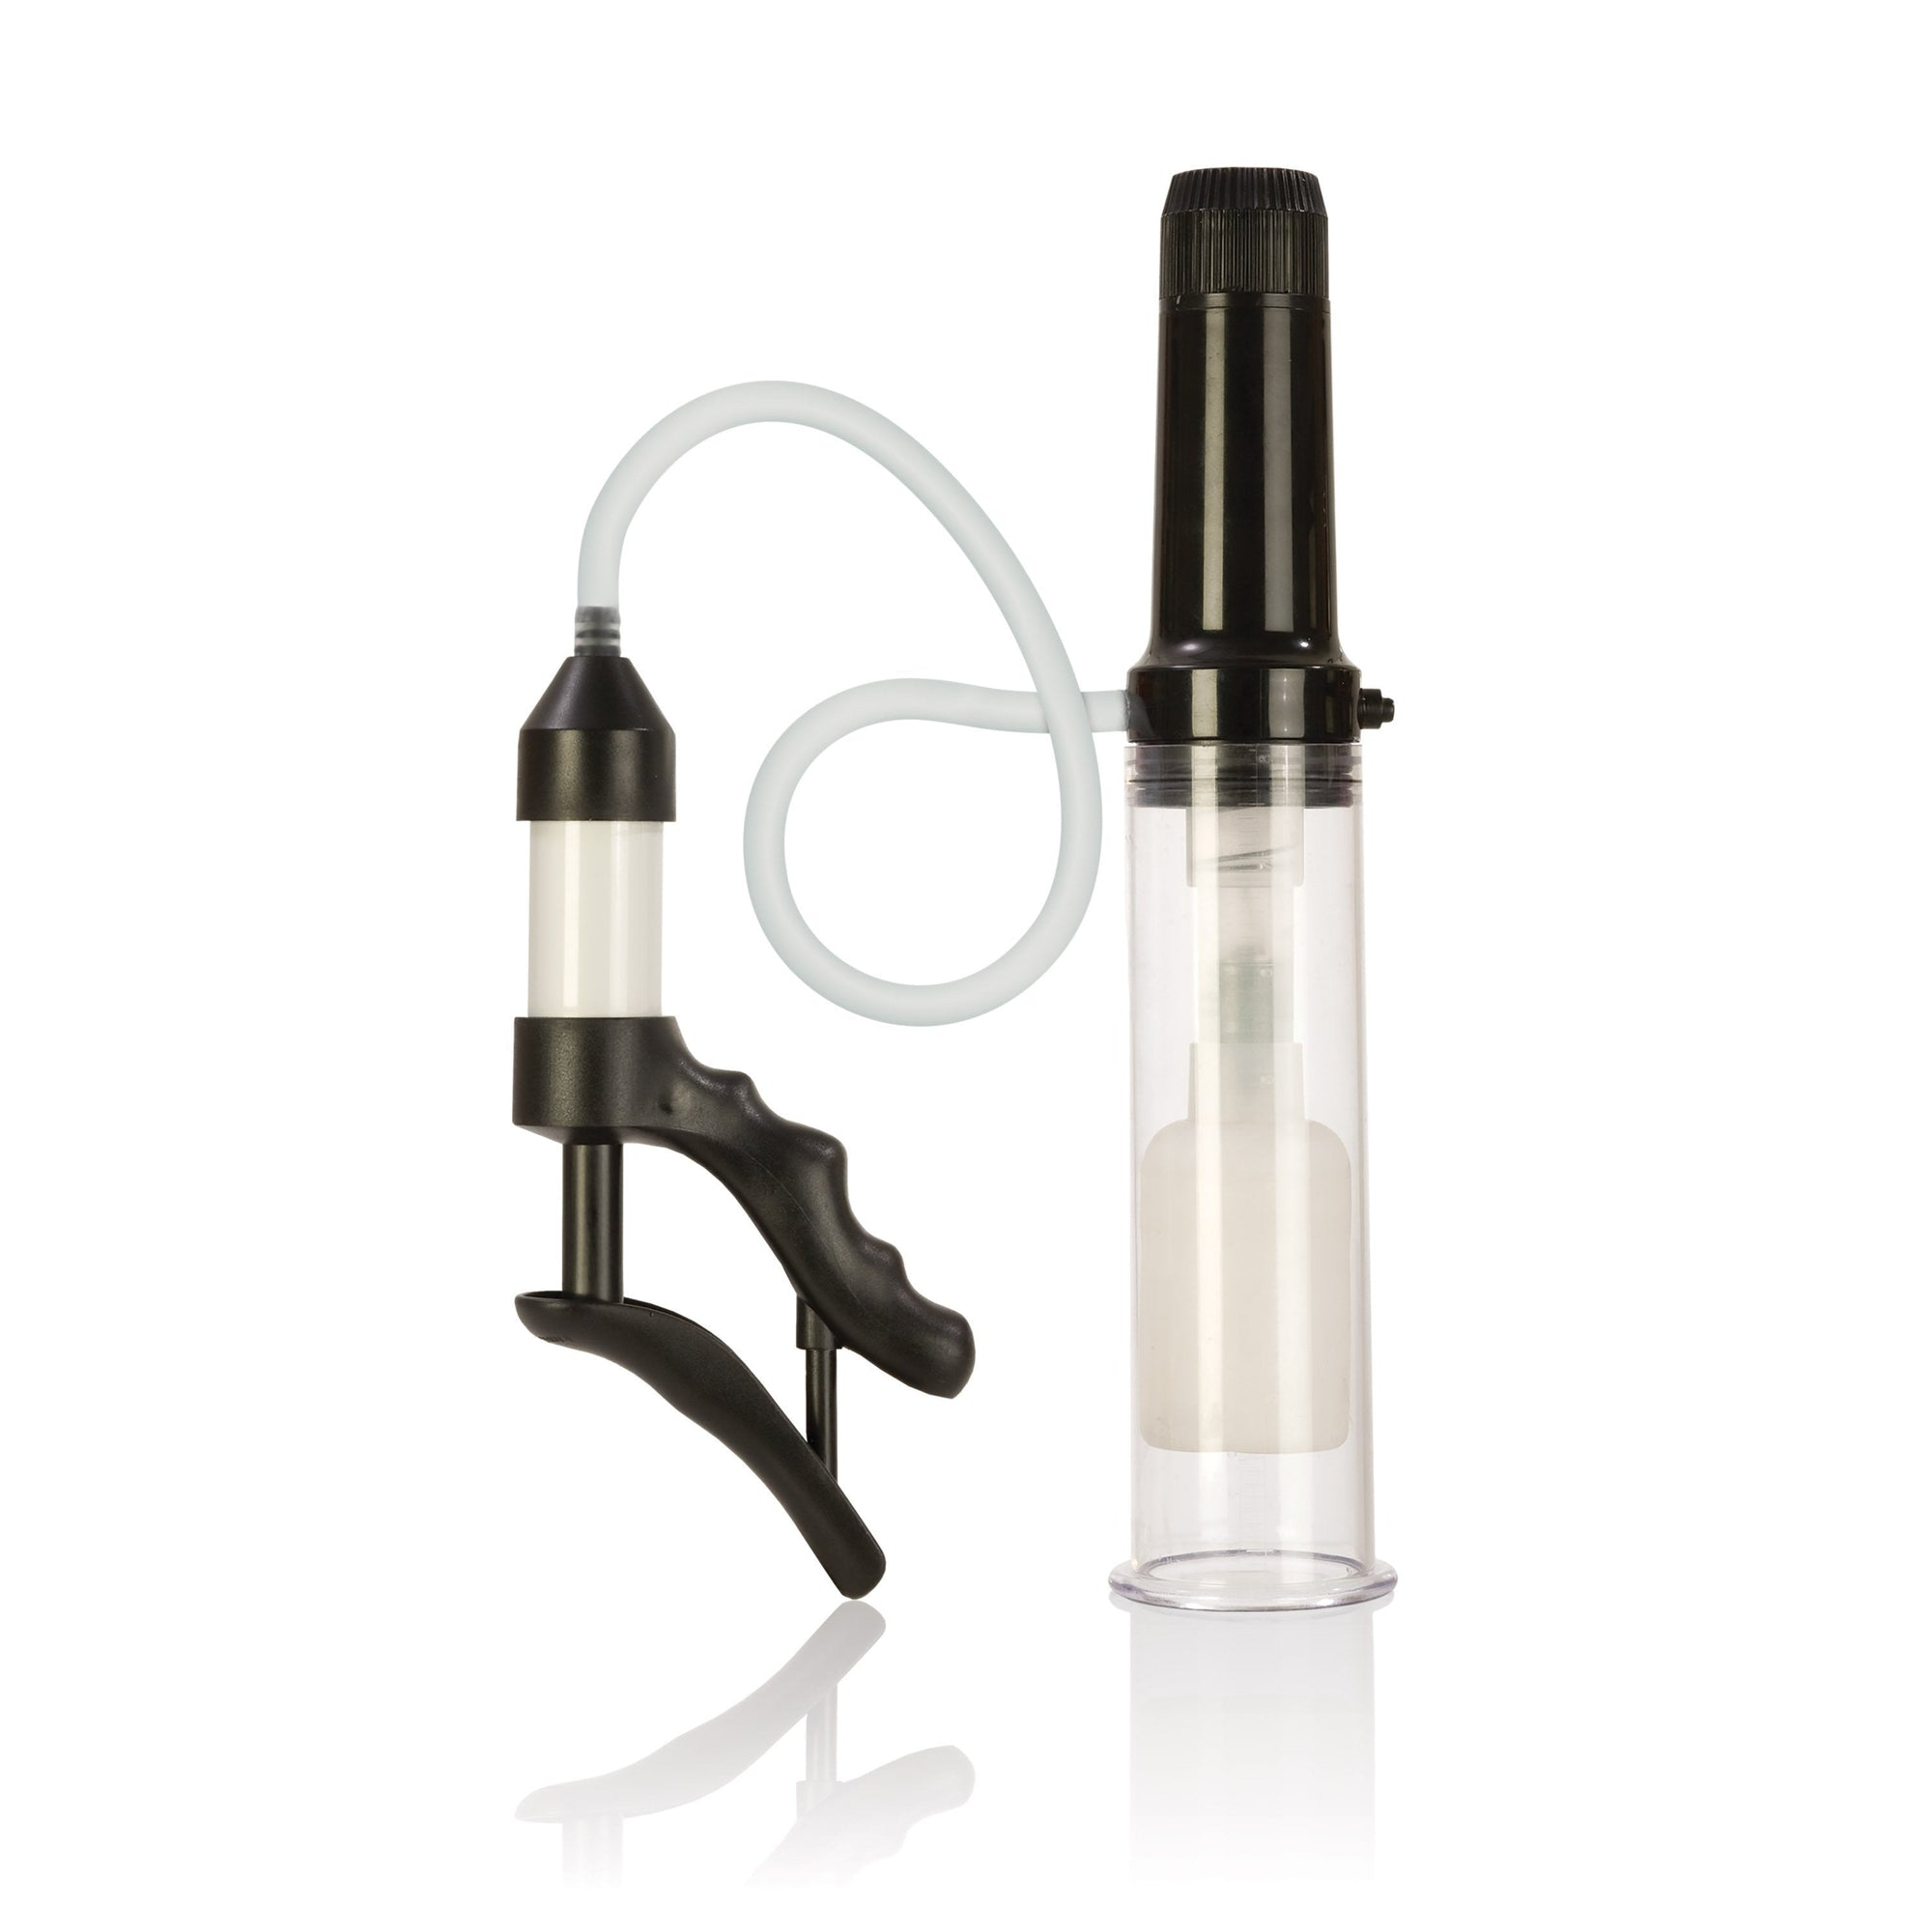 California Exotics - Accommodator Personal Exercise Penis Pump (Clear) -  Penis Pump (Vibration) Non Rechargeable  Durio.sg